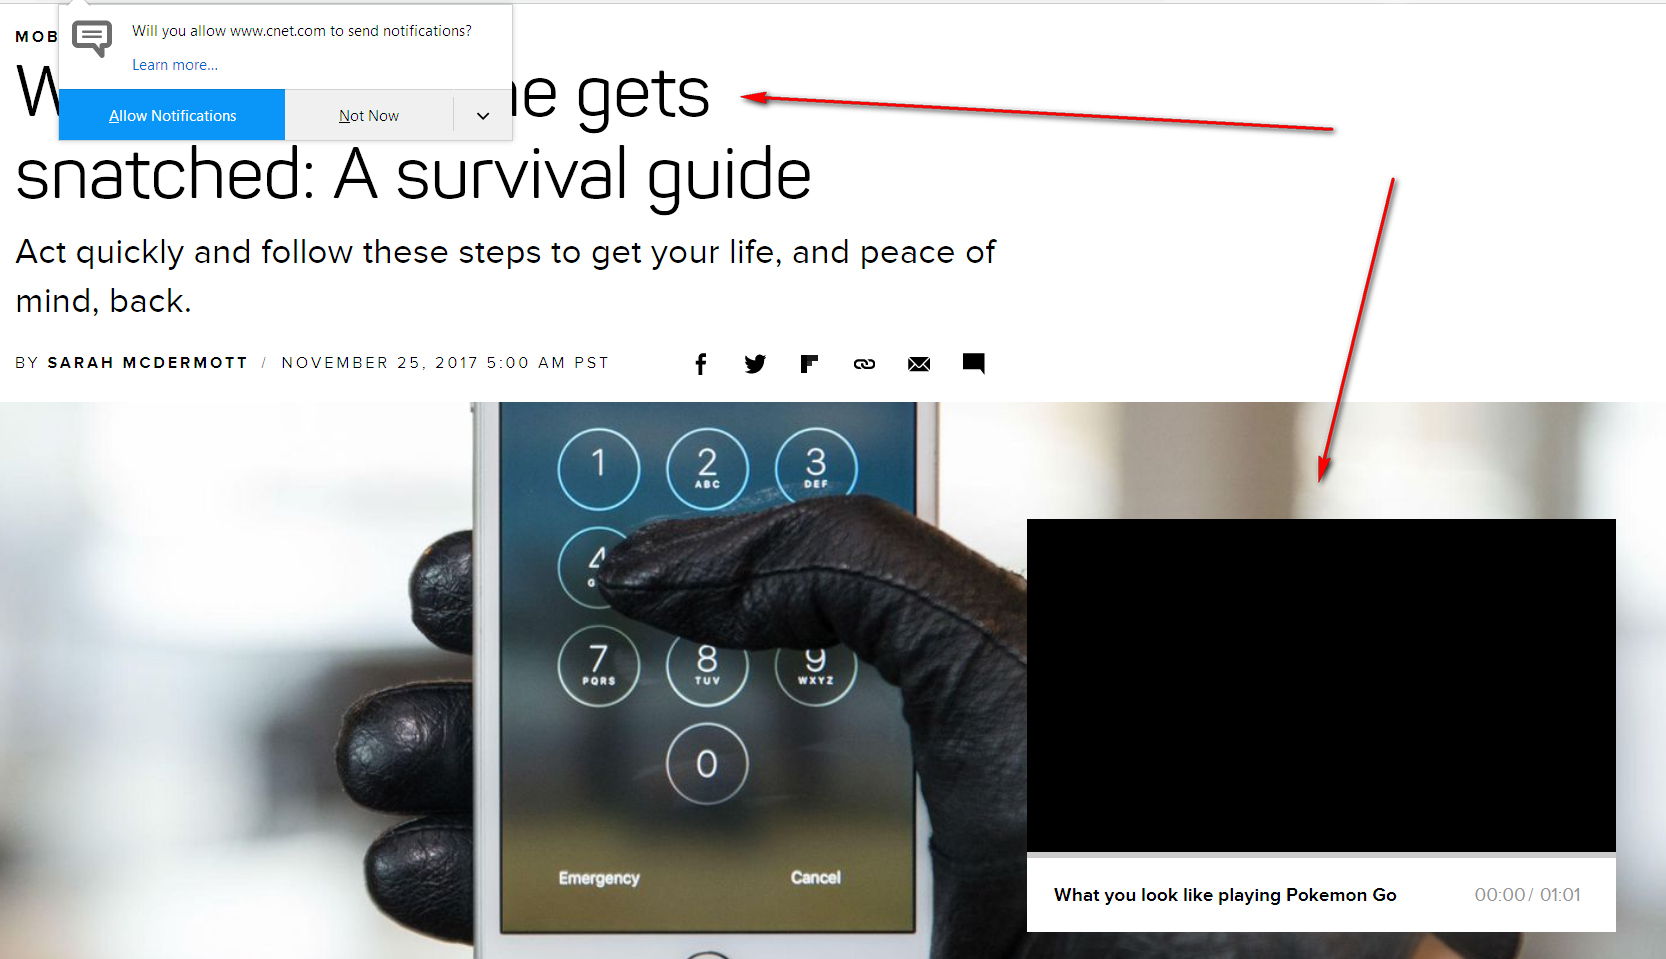 cnet-1.png